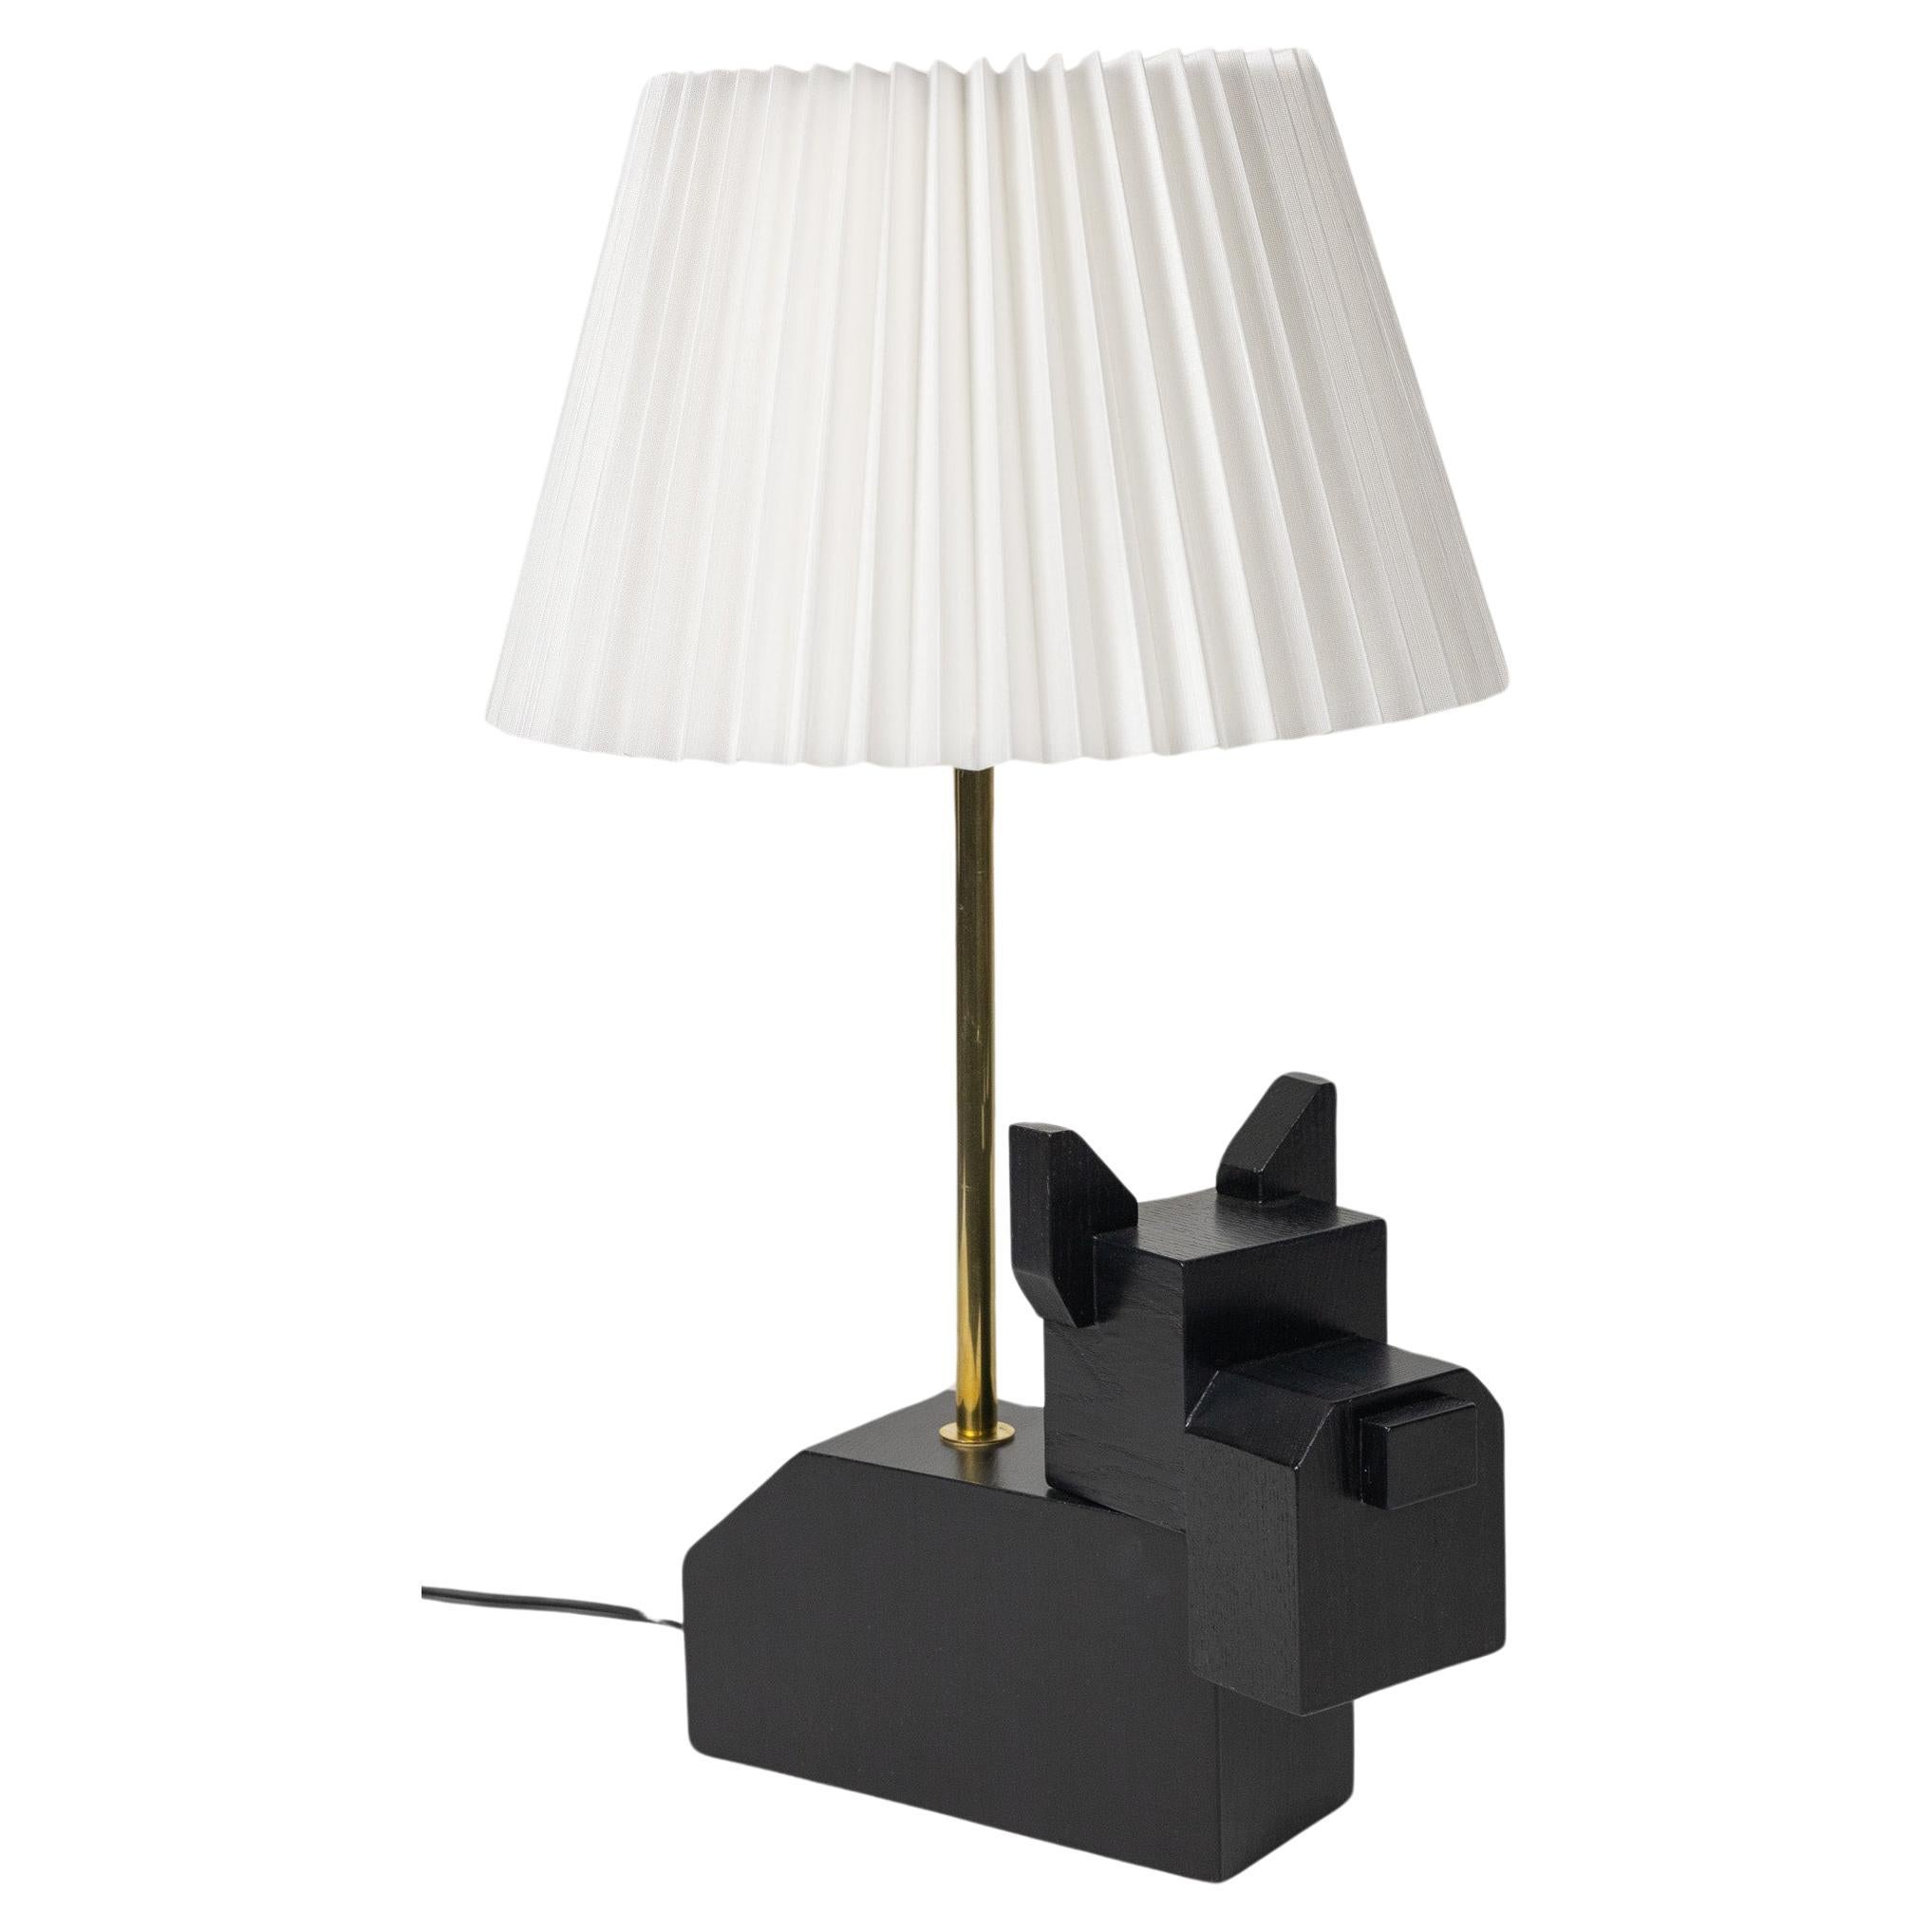 In-stock, Black Doggy Lamp, Wood Black Table Light with White Pleated Shade, Dog For Sale